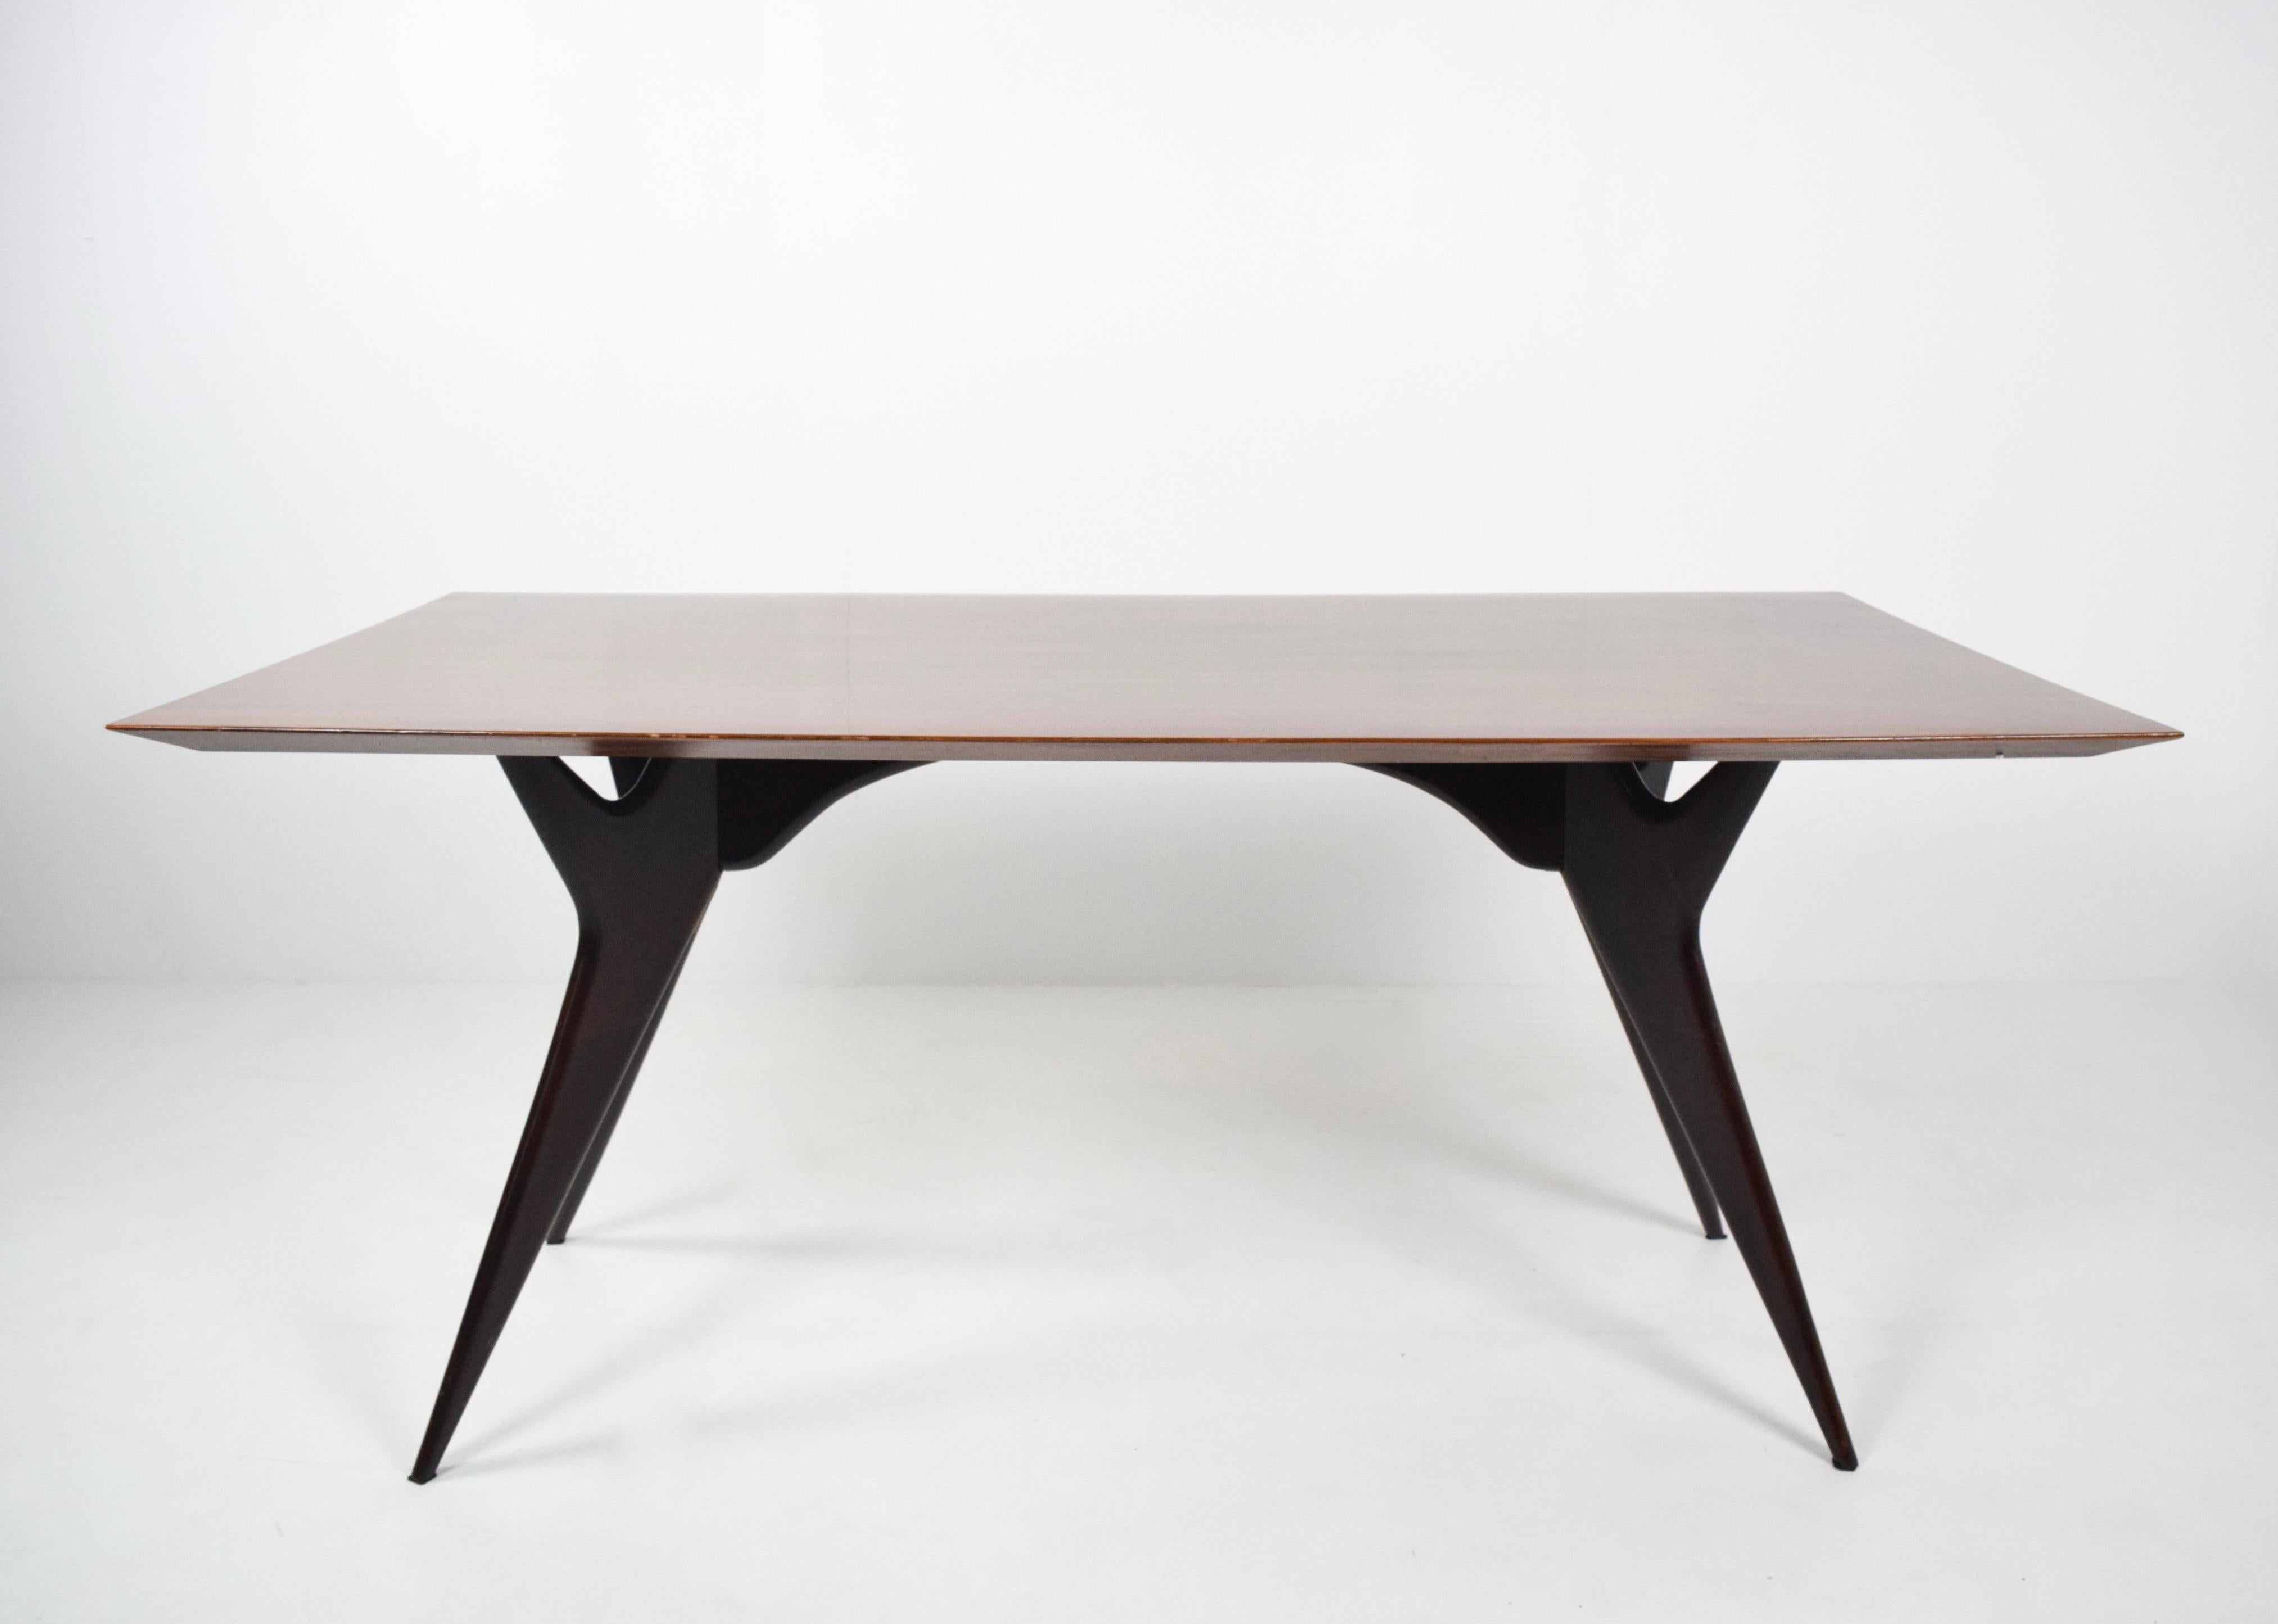 Super elegant dining or work table by Ico Parisi in rosewood for MIM Roma. The legs on both sides are tapered and a true eye-catcher. The surface has a gloss and no damages. This table is exceptionally light and easy to practically use as a dining